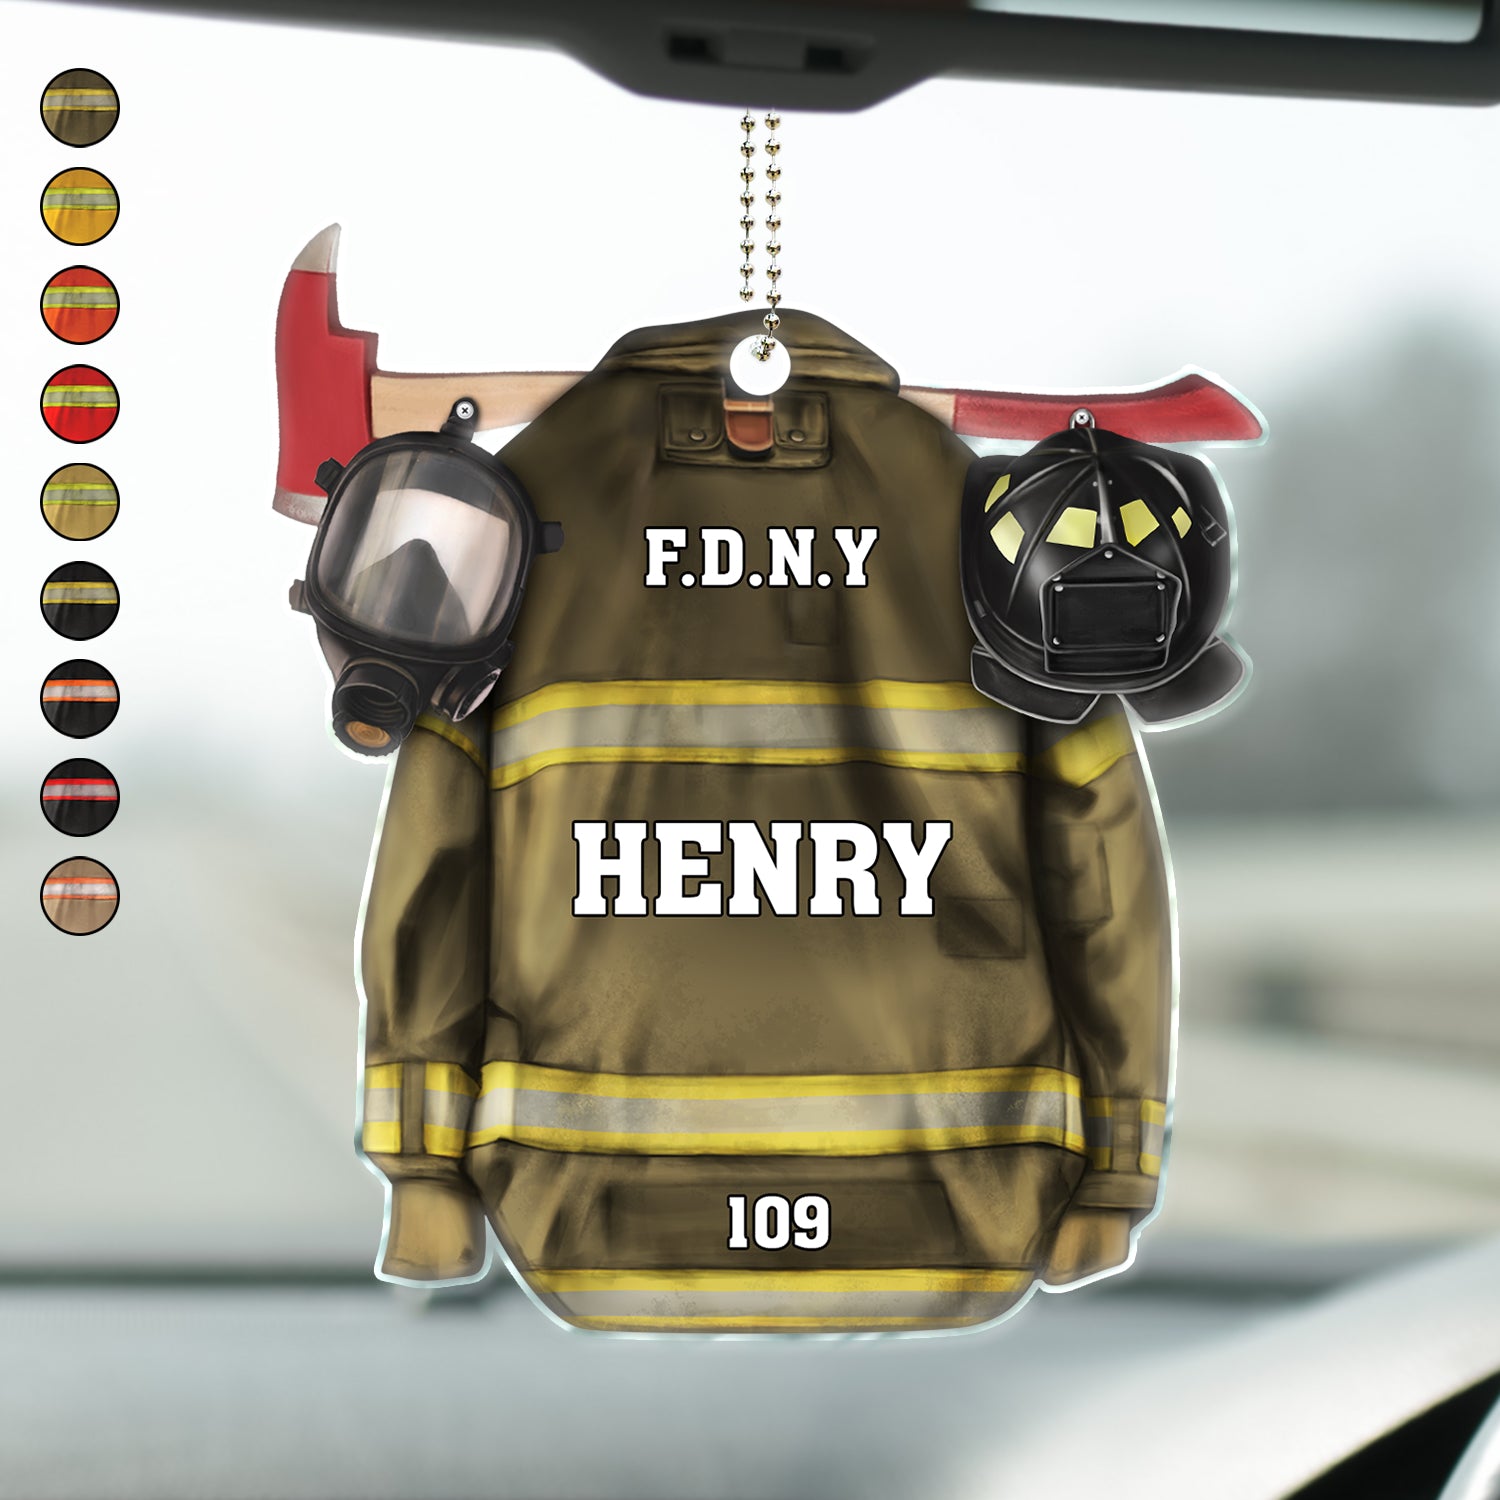 Firefighter Armor With Oxygen Mask - Gift For Firefighter - Personalized Acrylic Car Hanger